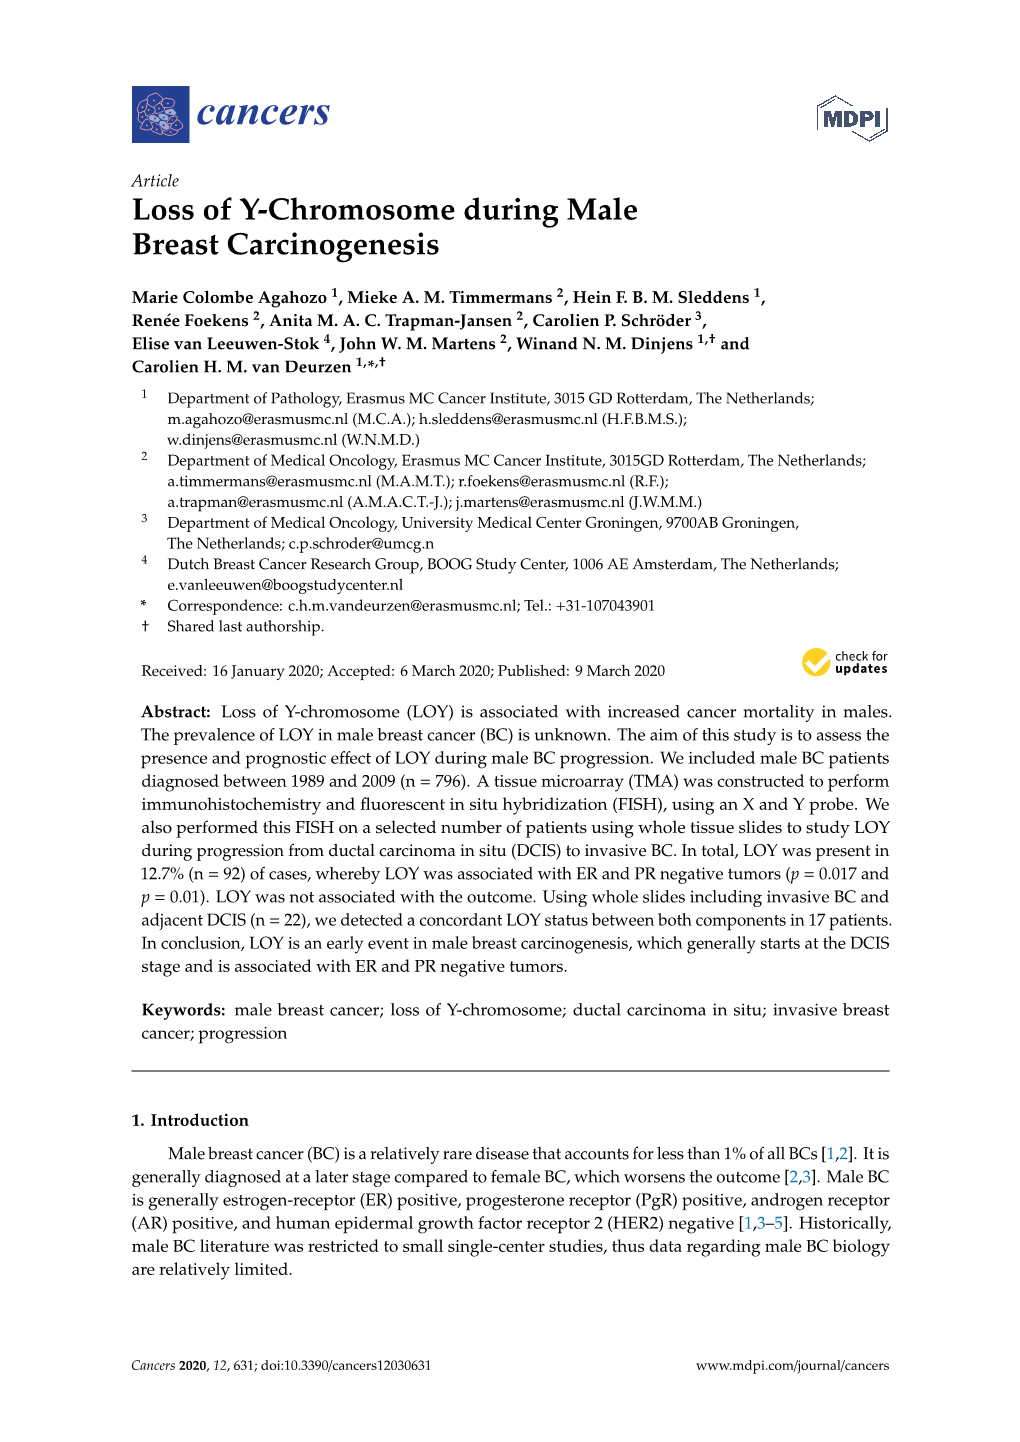 Loss of Y-Chromosome During Male Breast Carcinogenesis